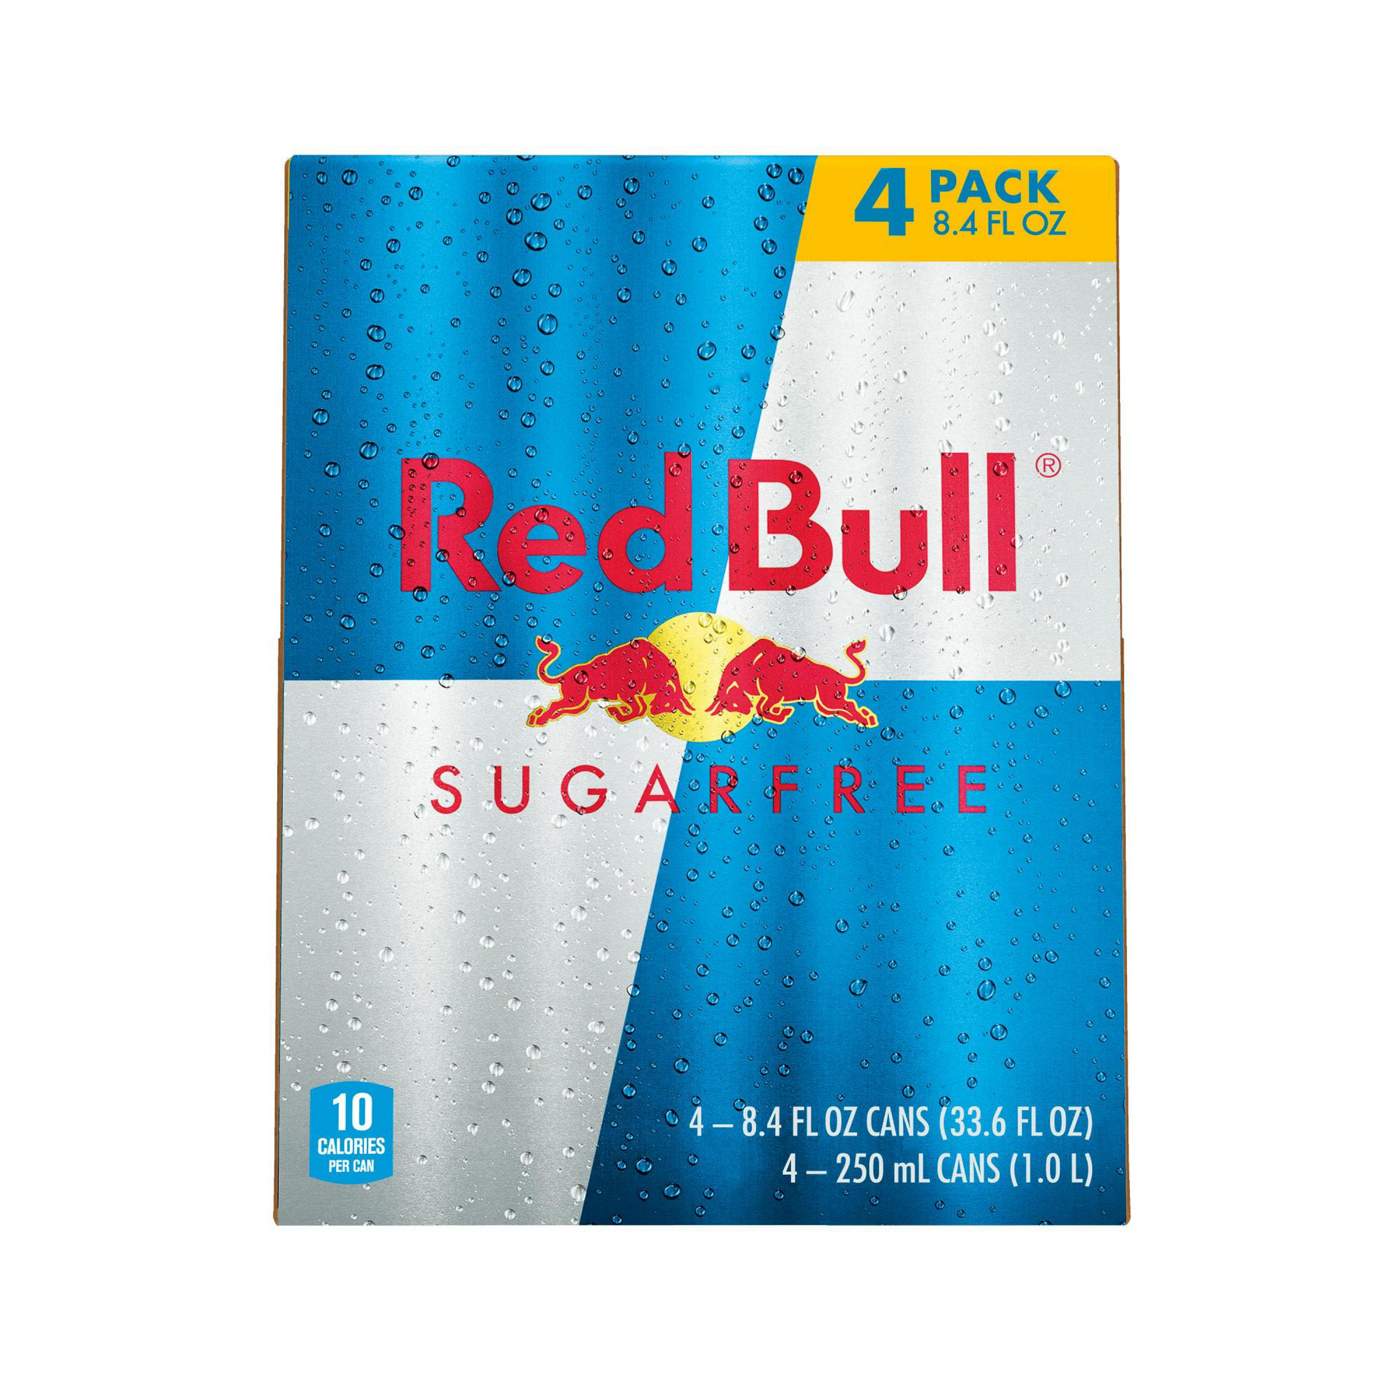 Red Bull Sugar Free Energy Drink 4 pk Cans; image 1 of 5